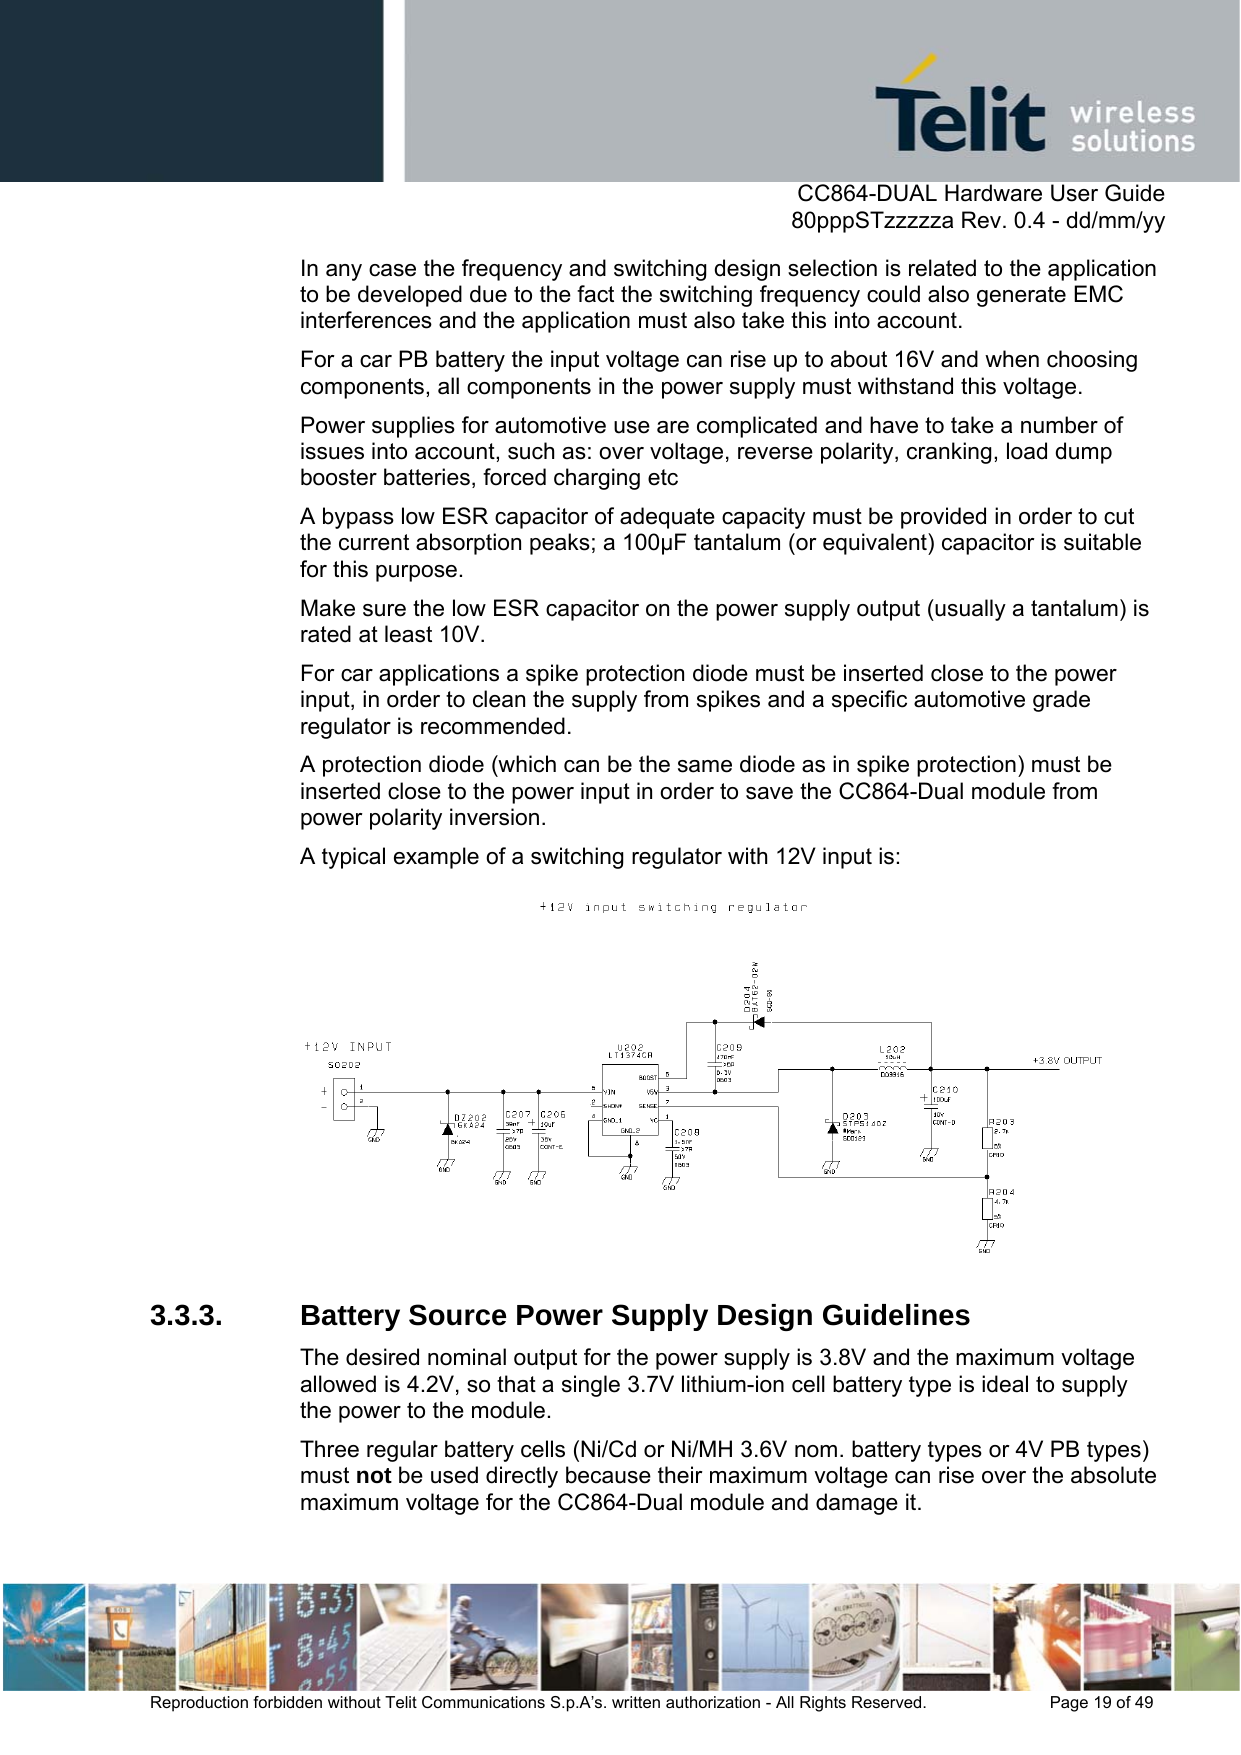      CC864-DUAL Hardware User Guide   80pppSTzzzzza Rev. 0.4 - dd/mm/yy   Reproduction forbidden without Telit Communications S.p.A’s. written authorization - All Rights Reserved.    Page 19 of 49  In any case the frequency and switching design selection is related to the application to be developed due to the fact the switching frequency could also generate EMC interferences and the application must also take this into account. For a car PB battery the input voltage can rise up to about 16V and when choosing components, all components in the power supply must withstand this voltage.  Power supplies for automotive use are complicated and have to take a number of issues into account, such as: over voltage, reverse polarity, cranking, load dump booster batteries, forced charging etc A bypass low ESR capacitor of adequate capacity must be provided in order to cut the current absorption peaks; a 100µF tantalum (or equivalent) capacitor is suitable for this purpose. Make sure the low ESR capacitor on the power supply output (usually a tantalum) is rated at least 10V. For car applications a spike protection diode must be inserted close to the power input, in order to clean the supply from spikes and a specific automotive grade regulator is recommended. A protection diode (which can be the same diode as in spike protection) must be inserted close to the power input in order to save the CC864-Dual module from power polarity inversion.  A typical example of a switching regulator with 12V input is:  3.3.3. Battery Source Power Supply Design Guidelines The desired nominal output for the power supply is 3.8V and the maximum voltage allowed is 4.2V, so that a single 3.7V lithium-ion cell battery type is ideal to supply the power to the module. Three regular battery cells (Ni/Cd or Ni/MH 3.6V nom. battery types or 4V PB types) must not be used directly because their maximum voltage can rise over the absolute maximum voltage for the CC864-Dual module and damage it. 